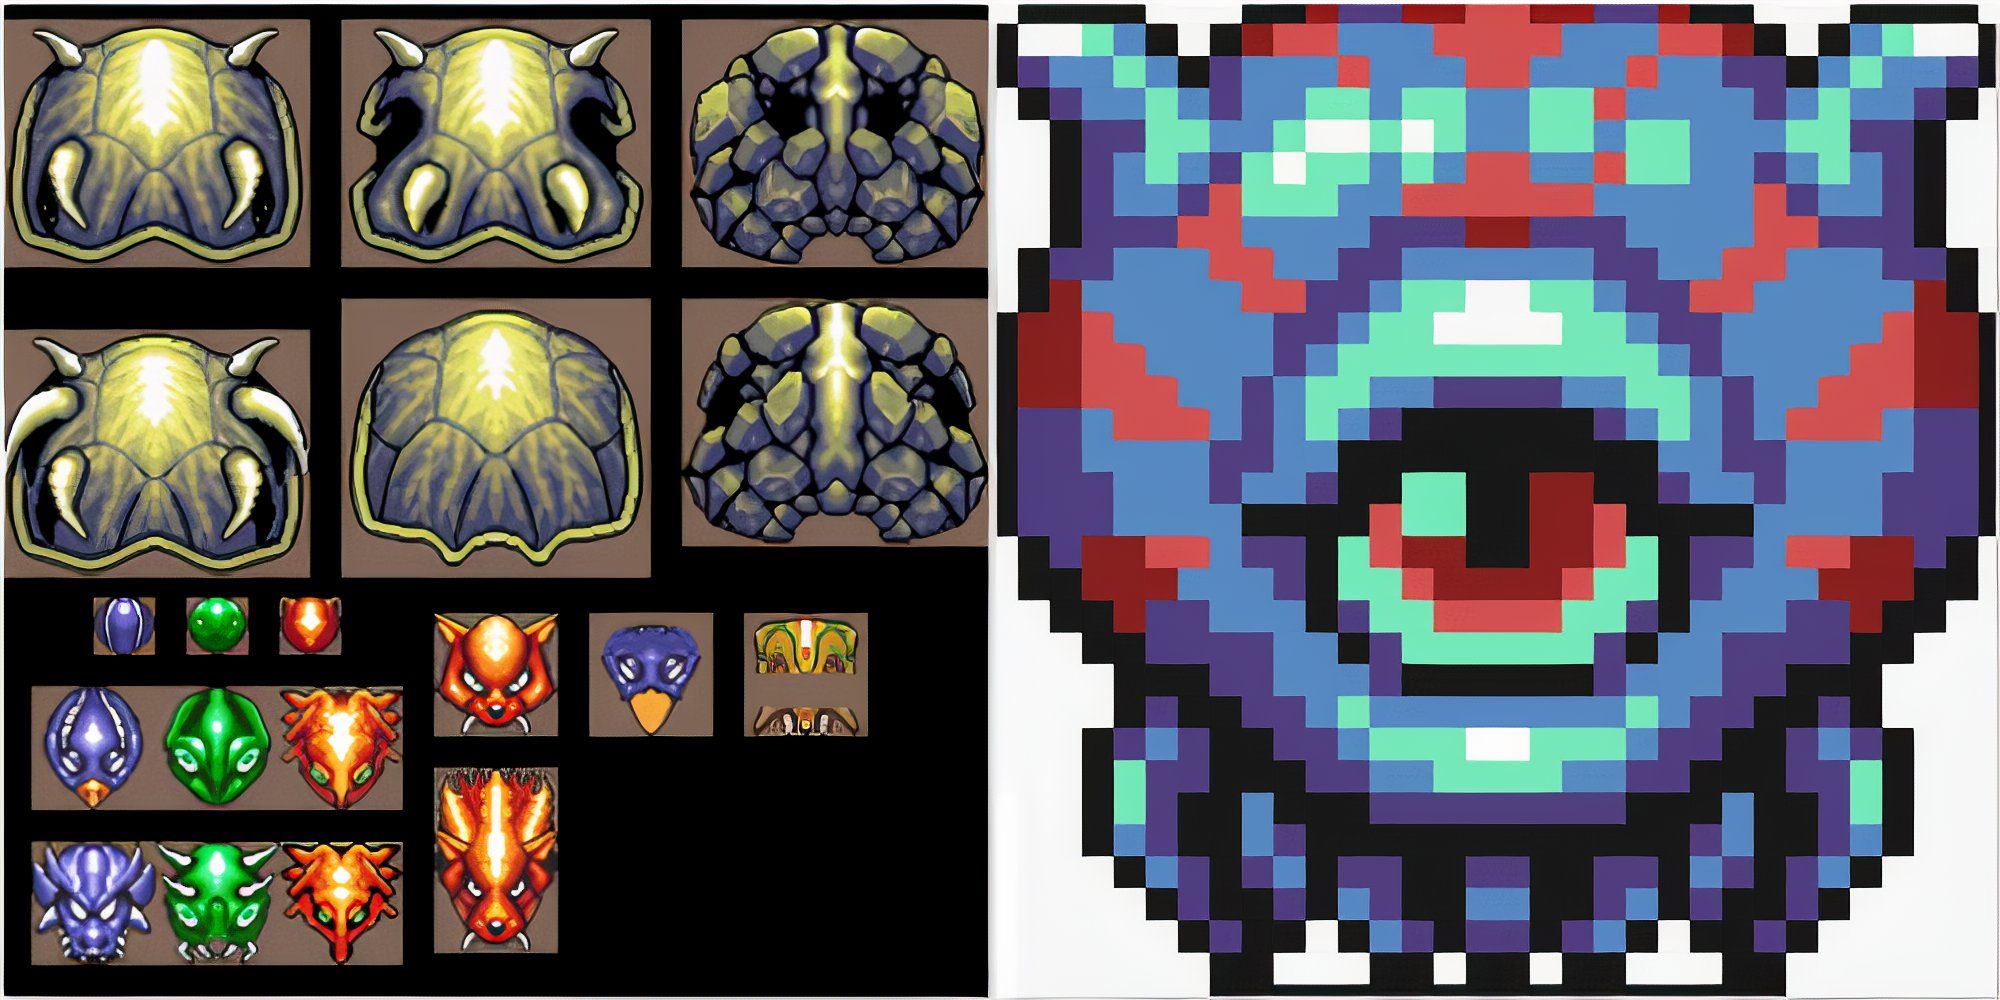 Early boss designs in The Legend of Zelda A Link to the Past